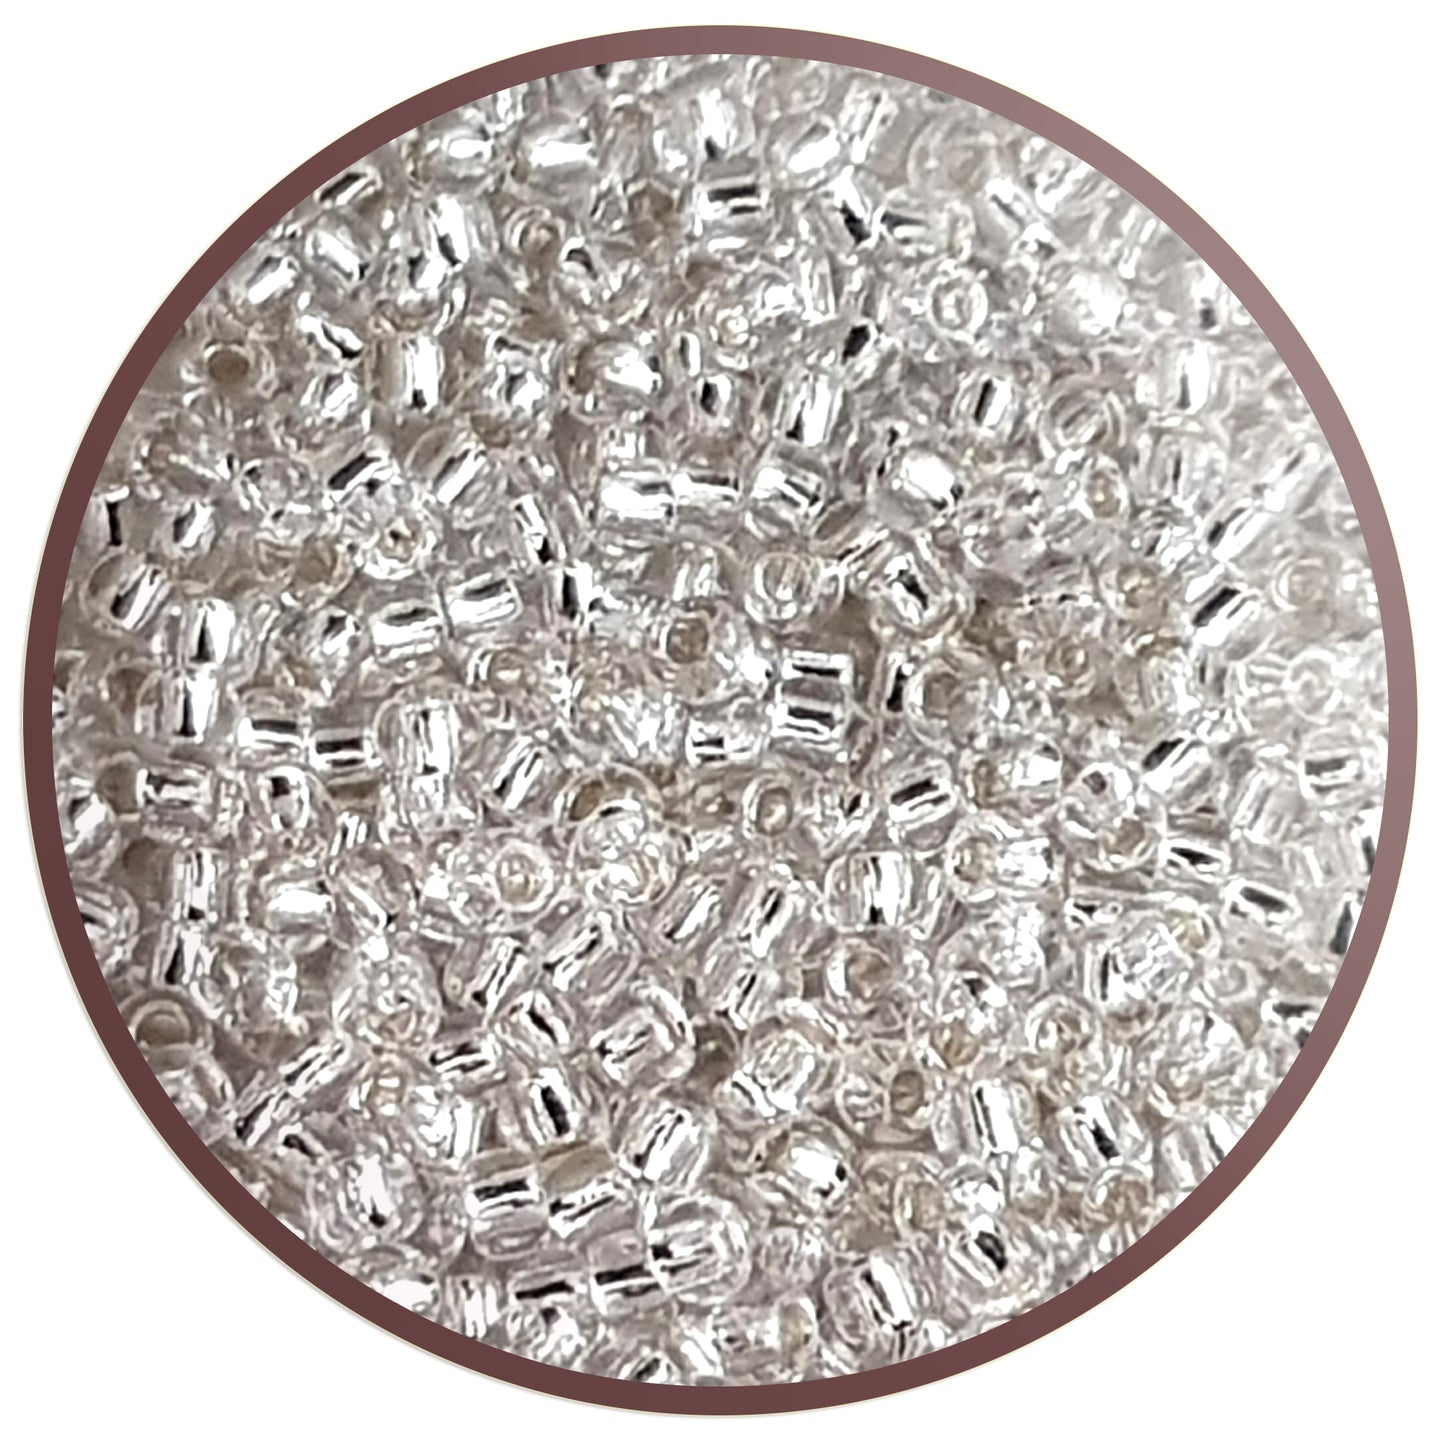 8/0 TR-21 Crystal Silver Lined 10g/30g Round Toho Seed Beads - Beading Supply